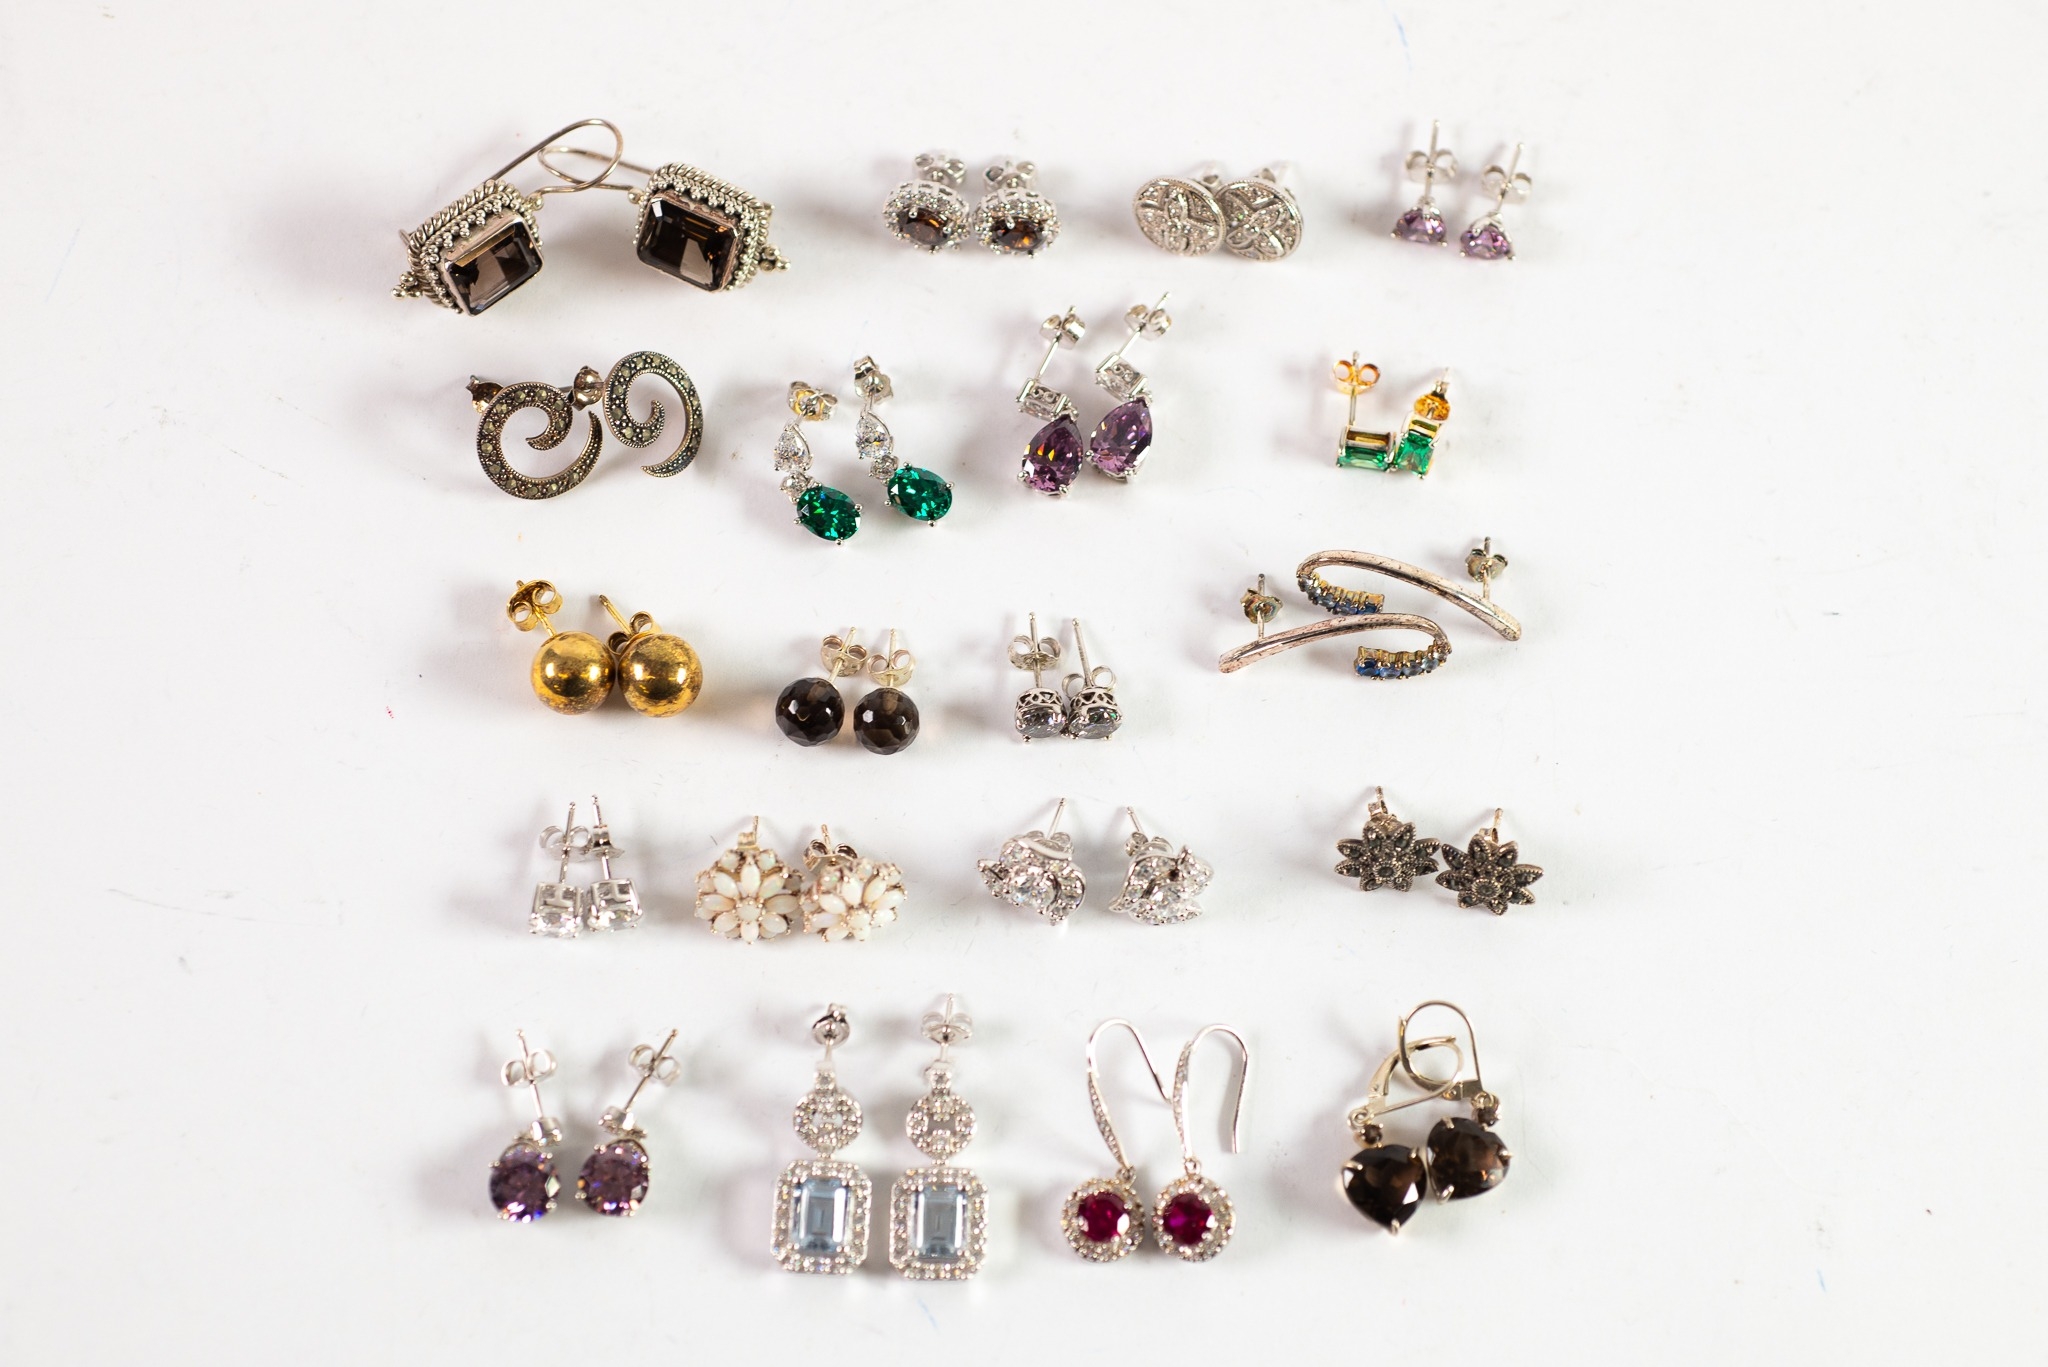 20 PAIRS OF SILVER AND VARIOUS GEMSET EARRINGS (20)